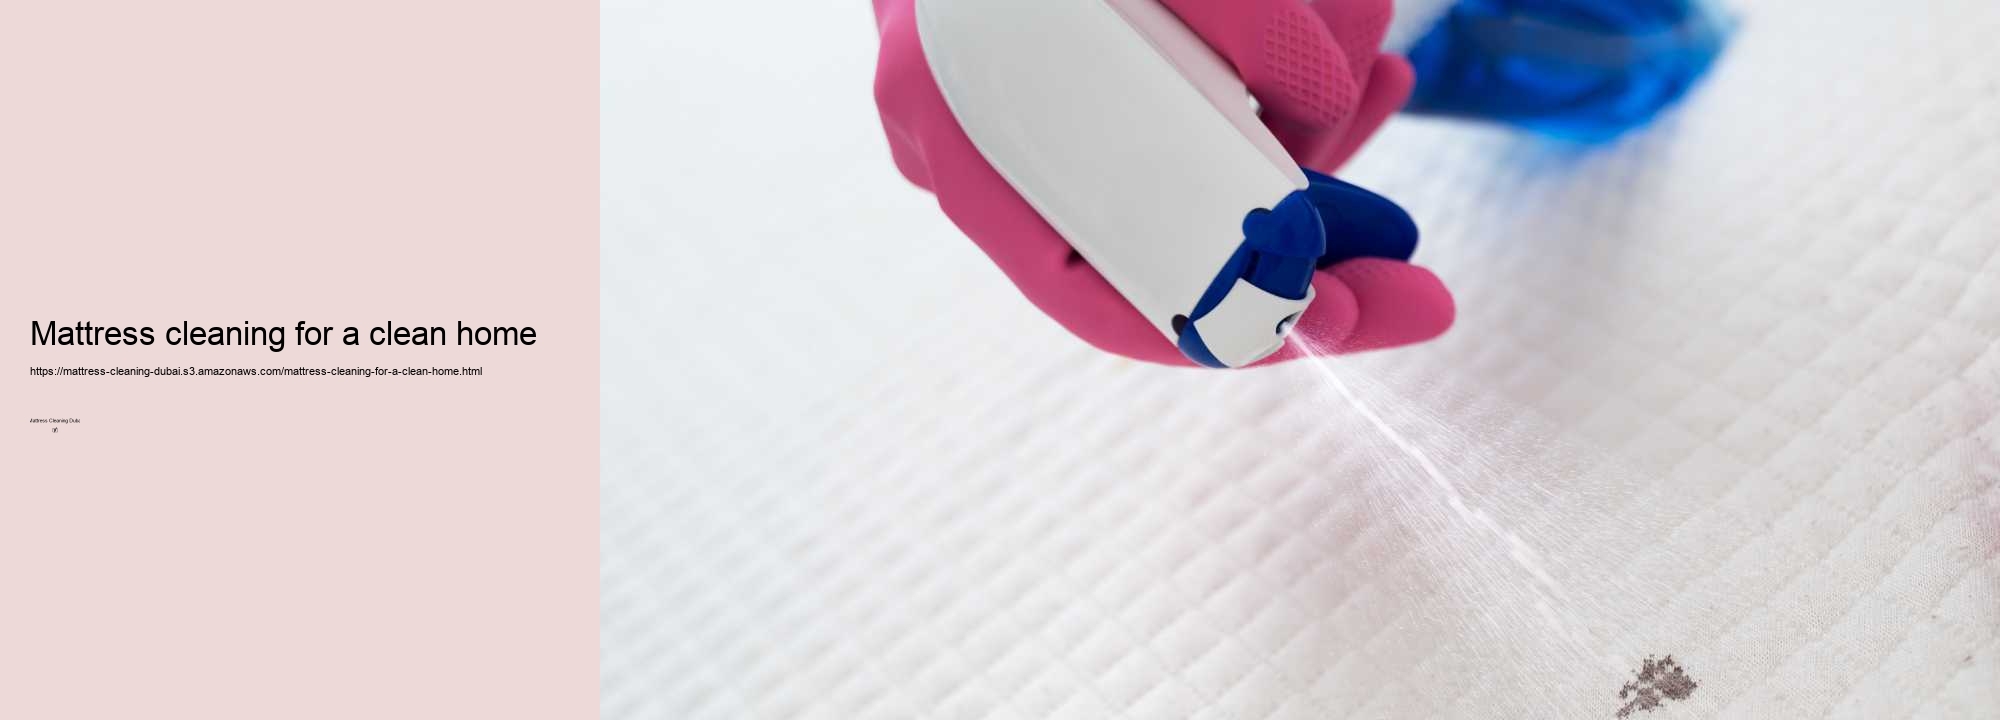 DIY vs Professional Mattress Cleaning in Dubai: Comparing Costs and Benefits